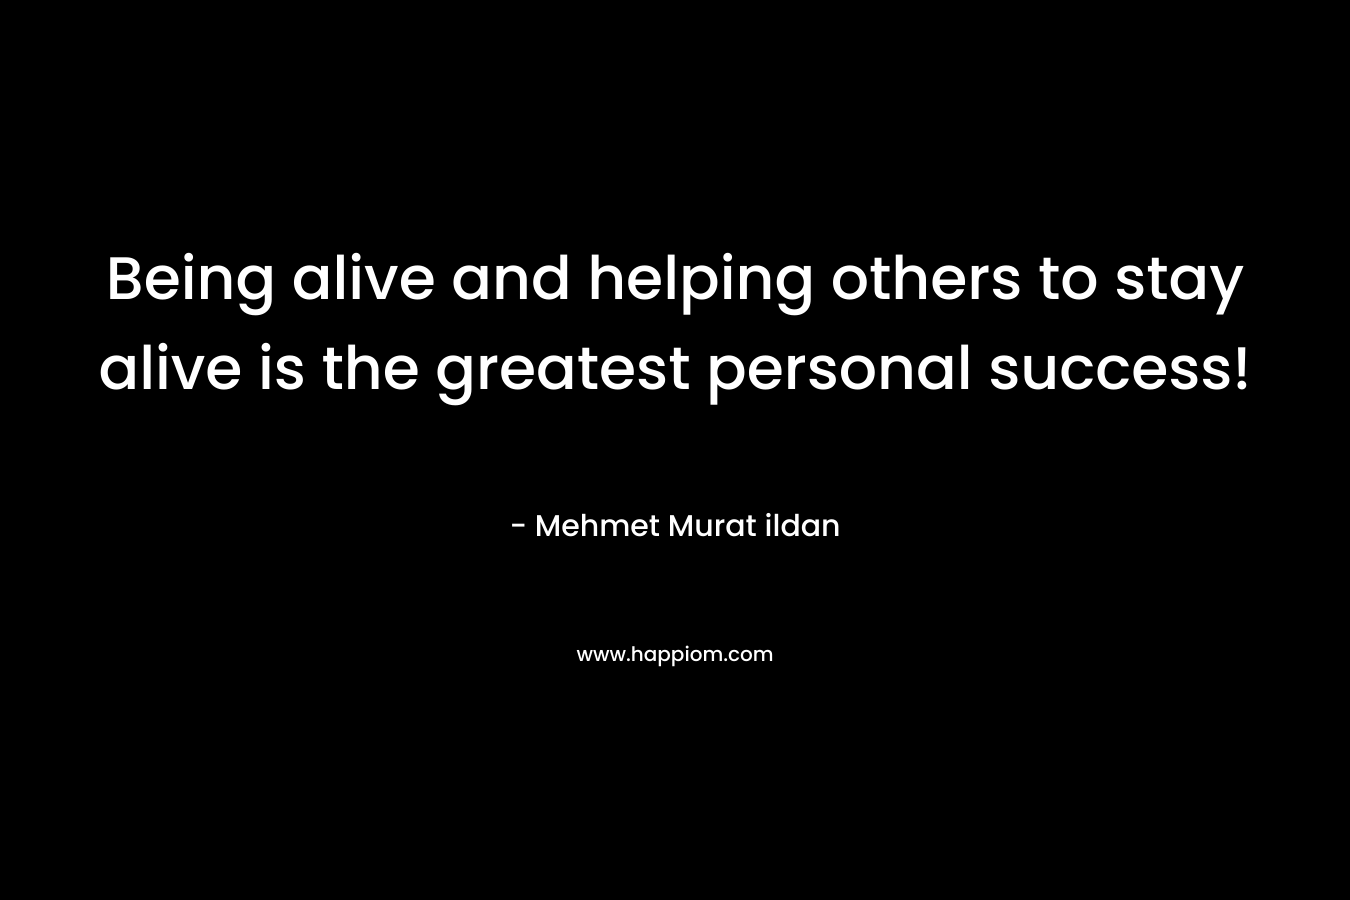 Being alive and helping others to stay alive is the greatest personal success!